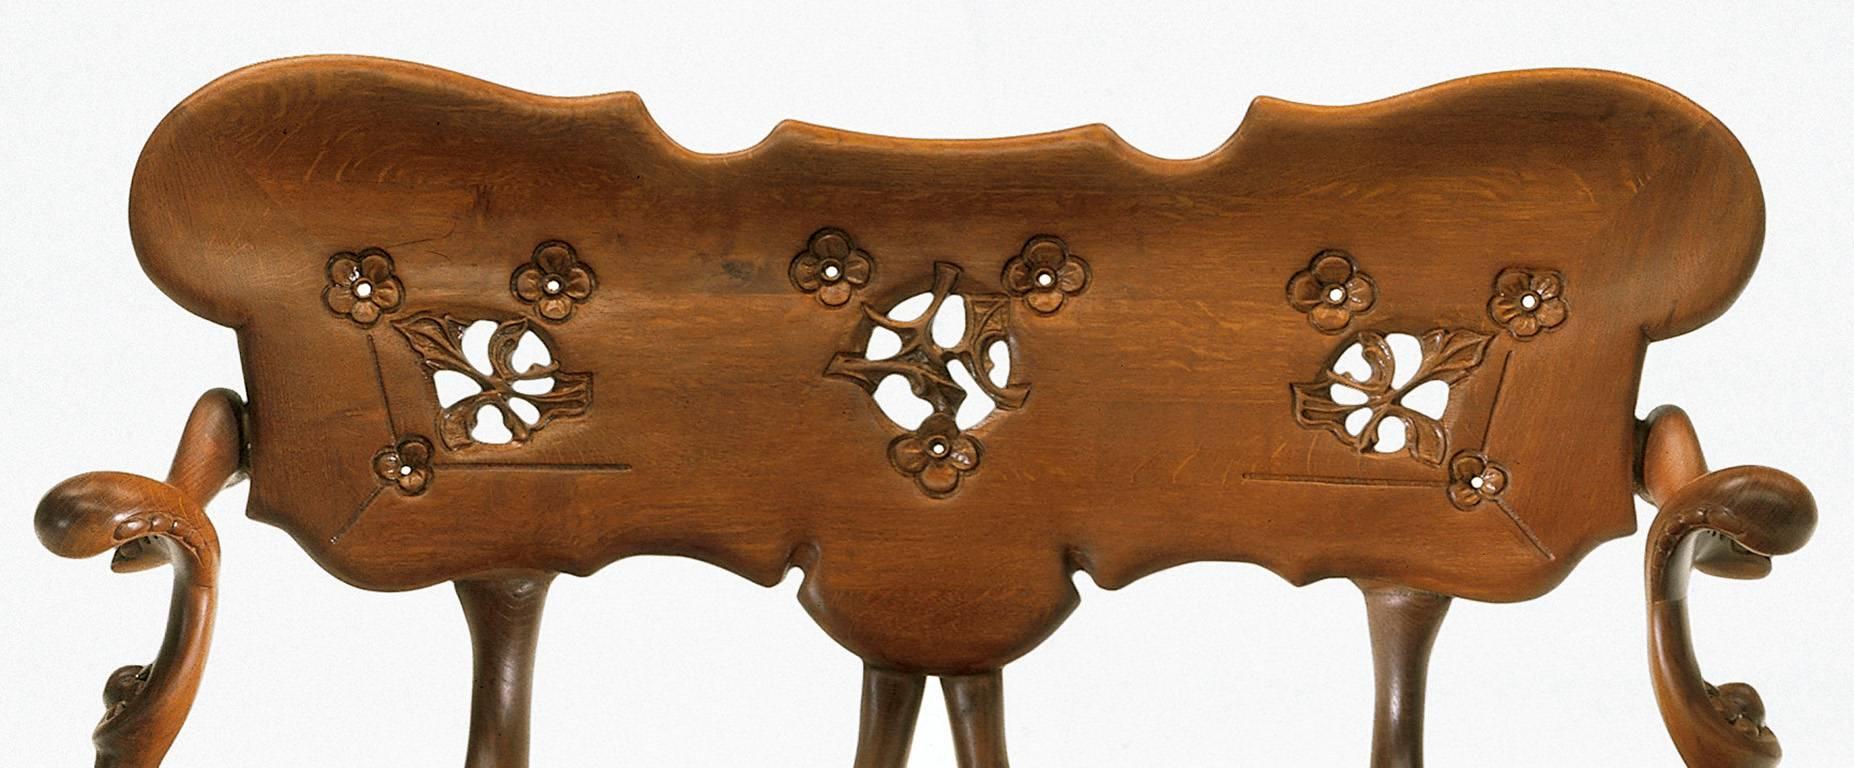 Bench designed by Antonio Gaudi manufactured in Barcelona by BD.

Material: solid varnished oak.

Measures: 54 x 118 x 95 H cm

Year: 1902

Antoni Gaudí (1852 / 1926) is, without doubt, the most internationally well-known Spanish architect.